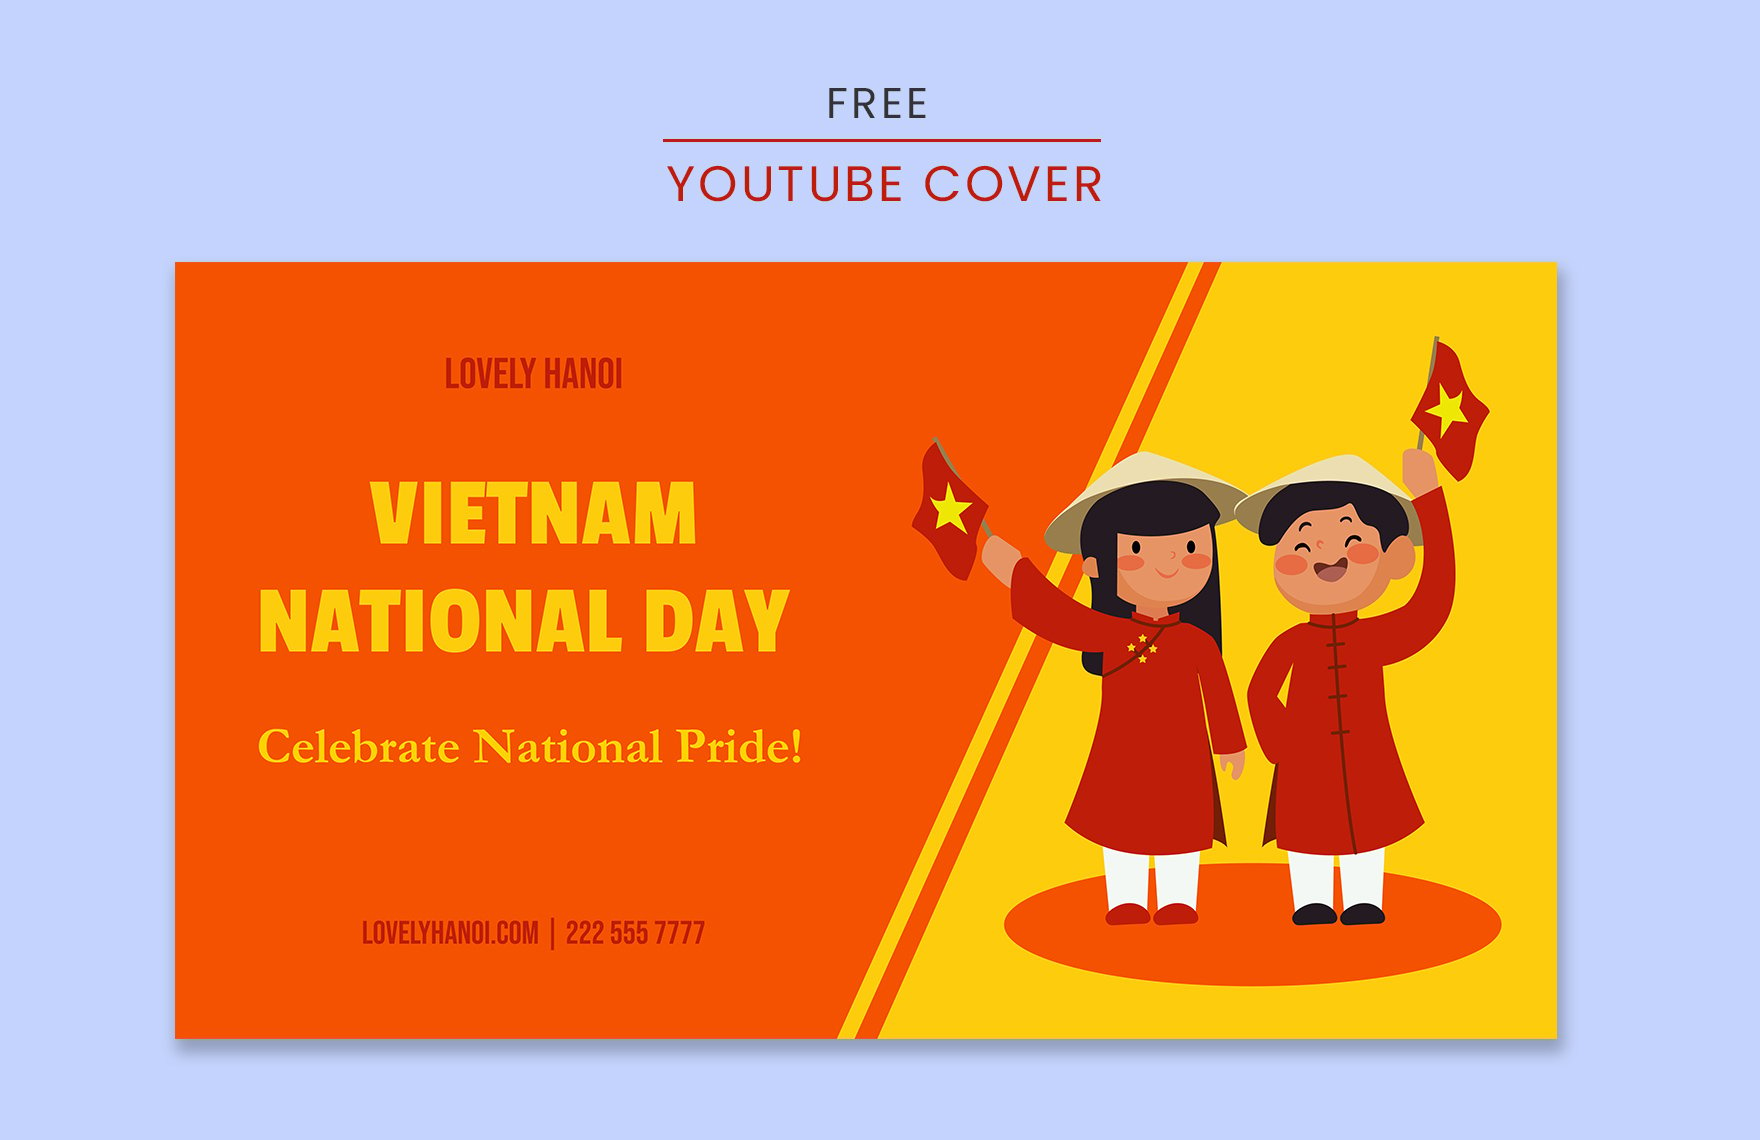 Vietnam National Day Youtube Thumbnail Cover